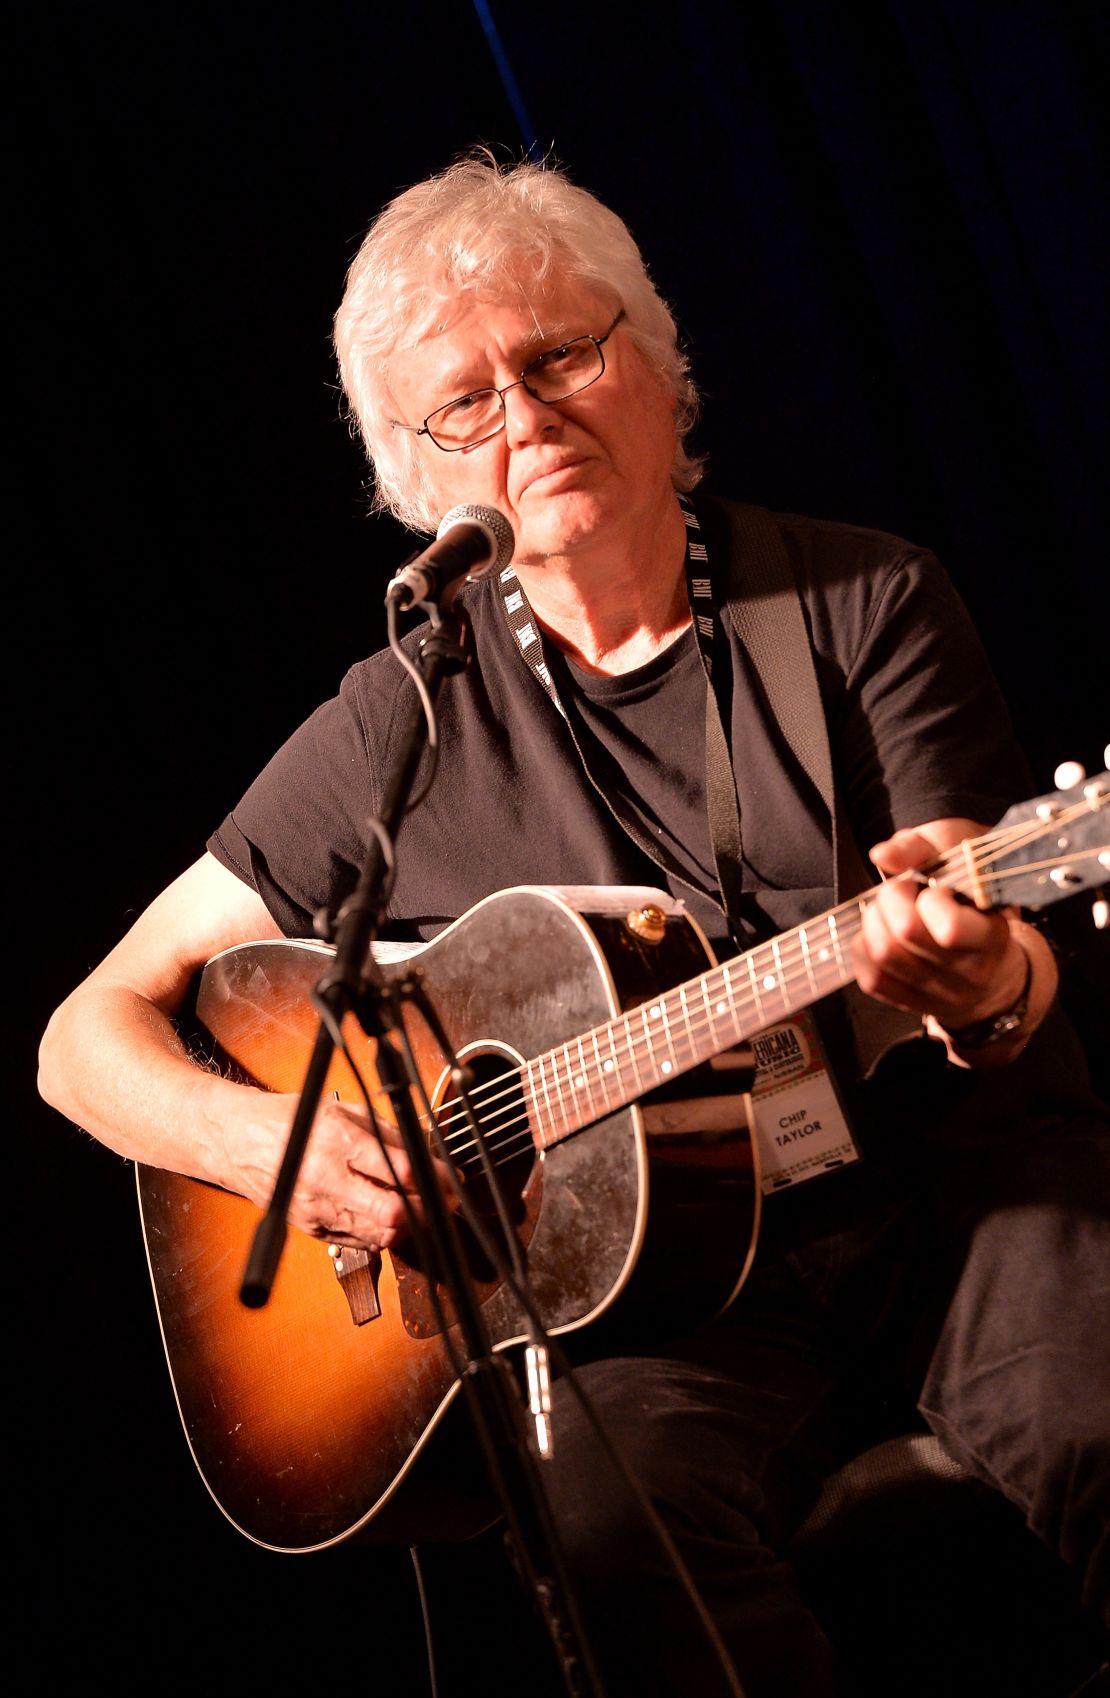 Chip Taylor wrote "Wild Thing" after being asked for a rock 'n' roll song.